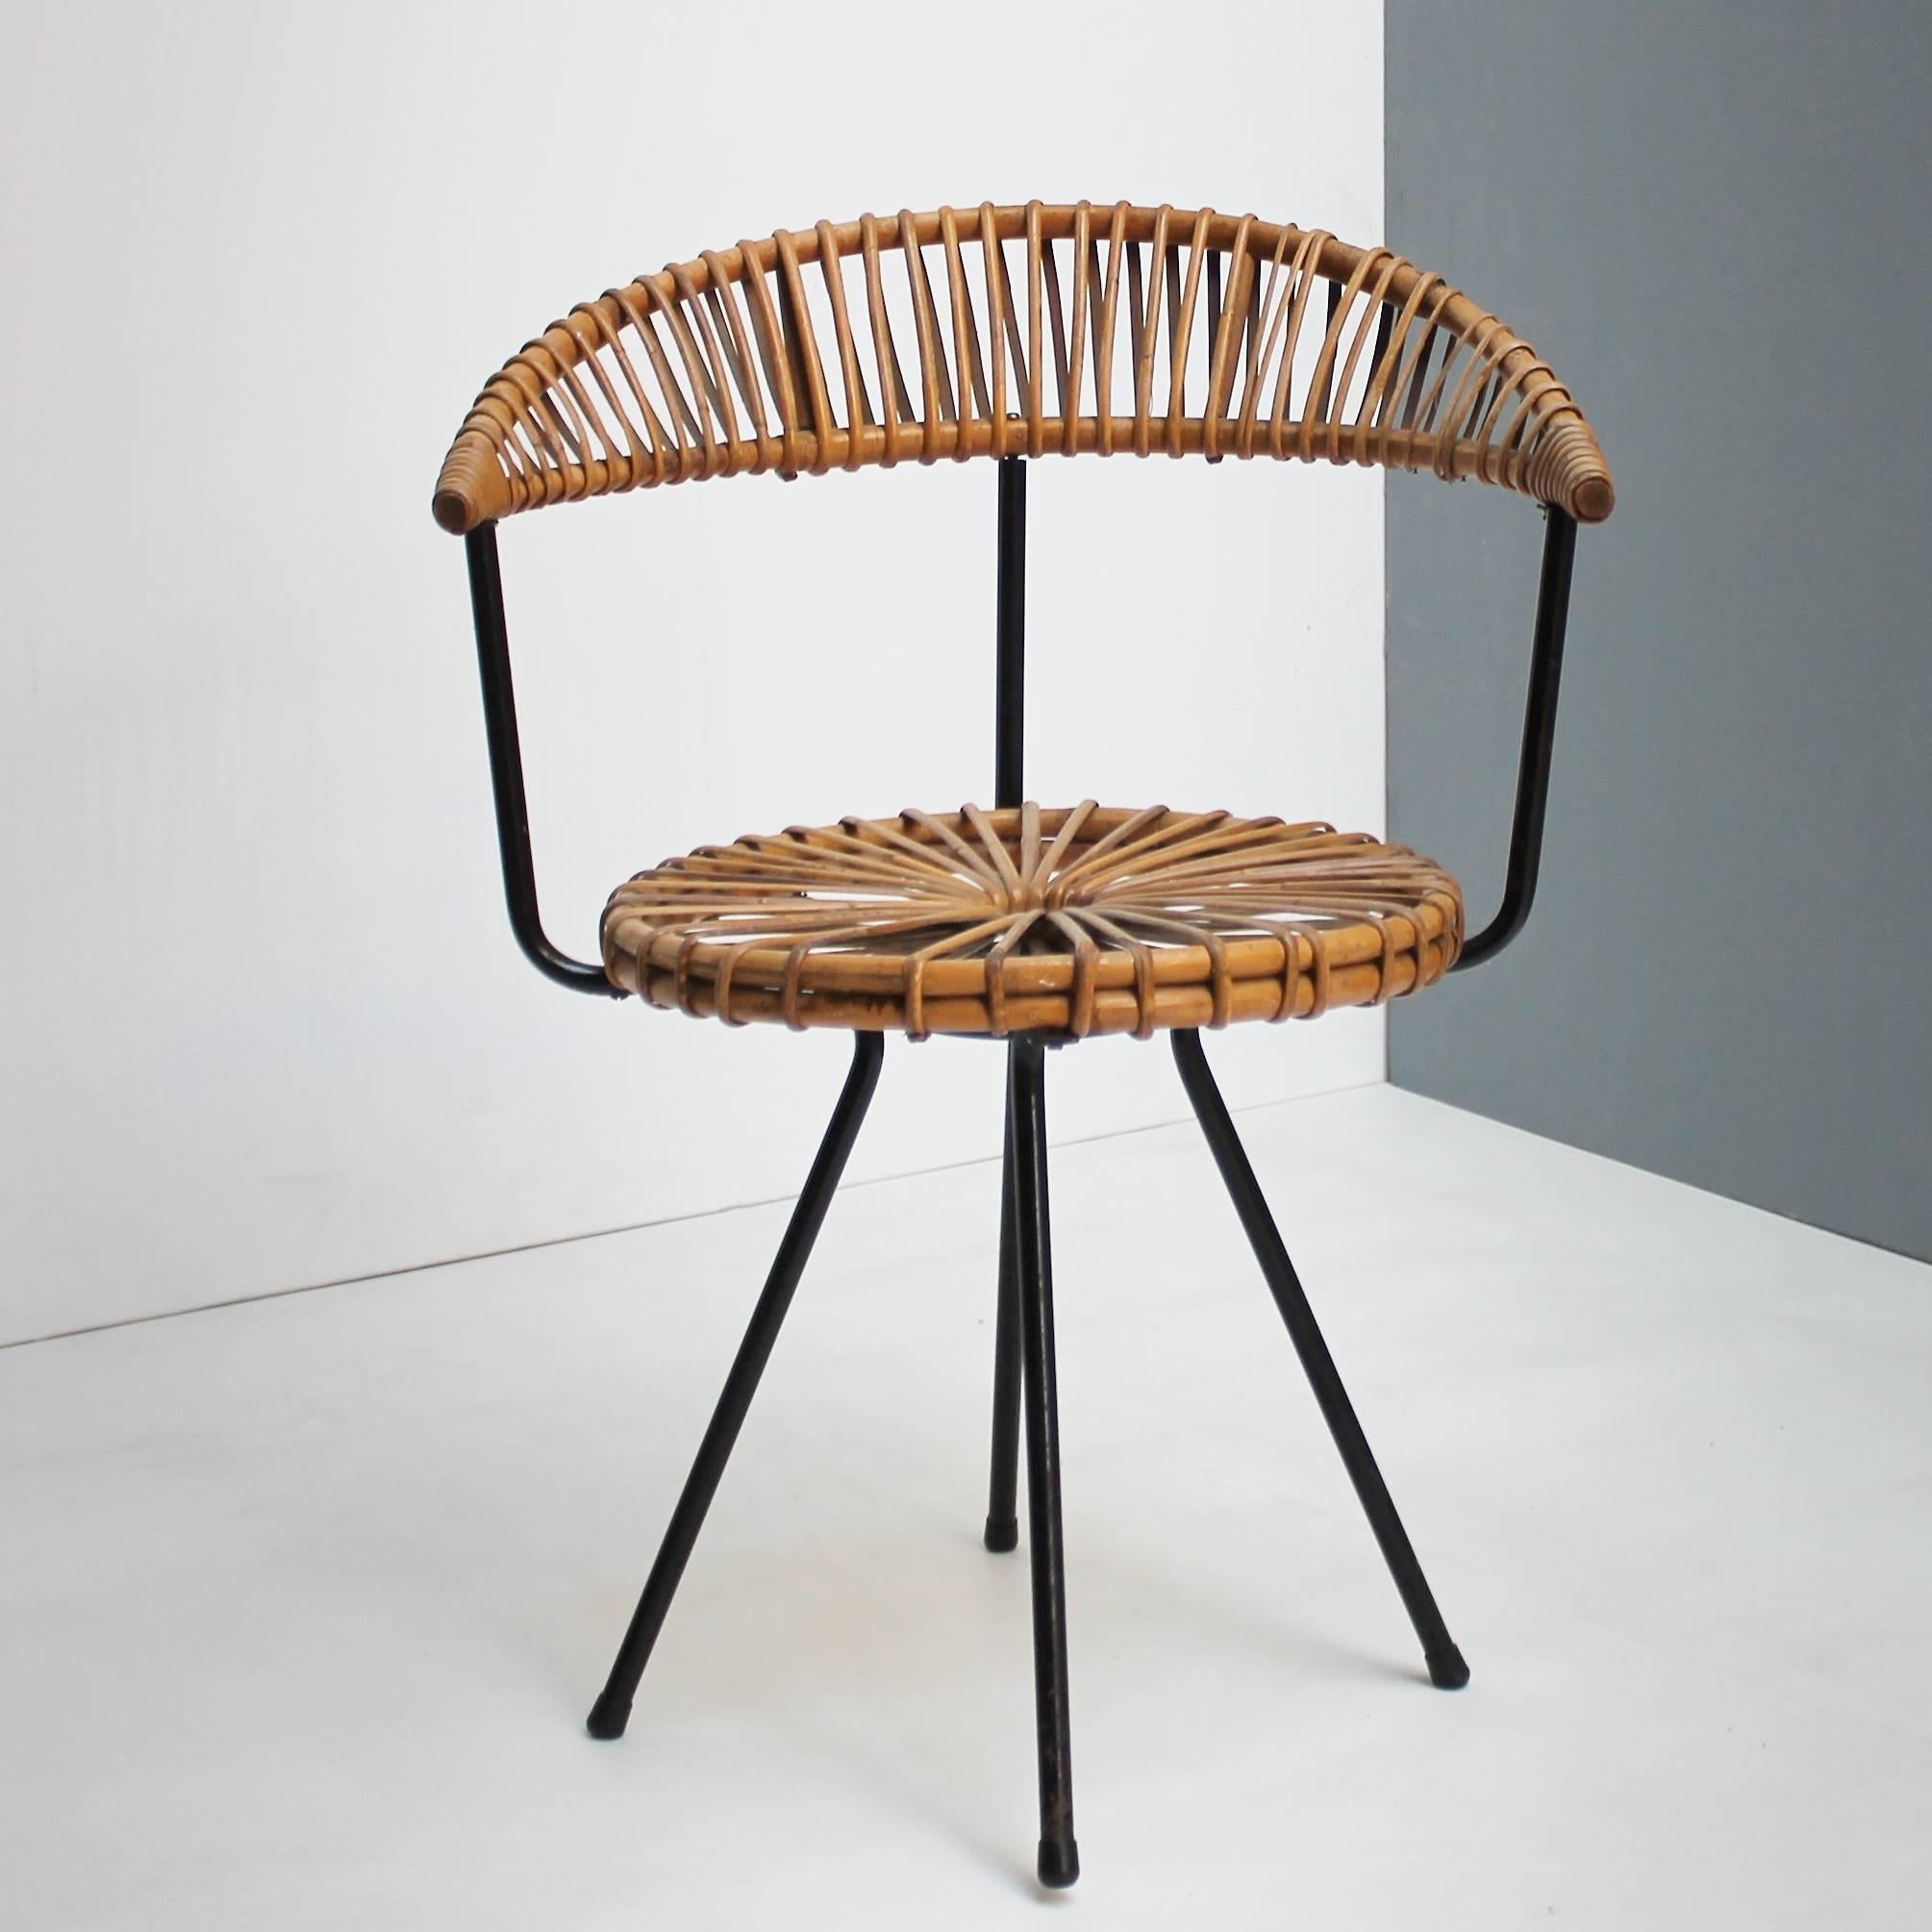 Mid-20th Century Rattan Chair by Dirk Van Sliedregt for Rohe Holland